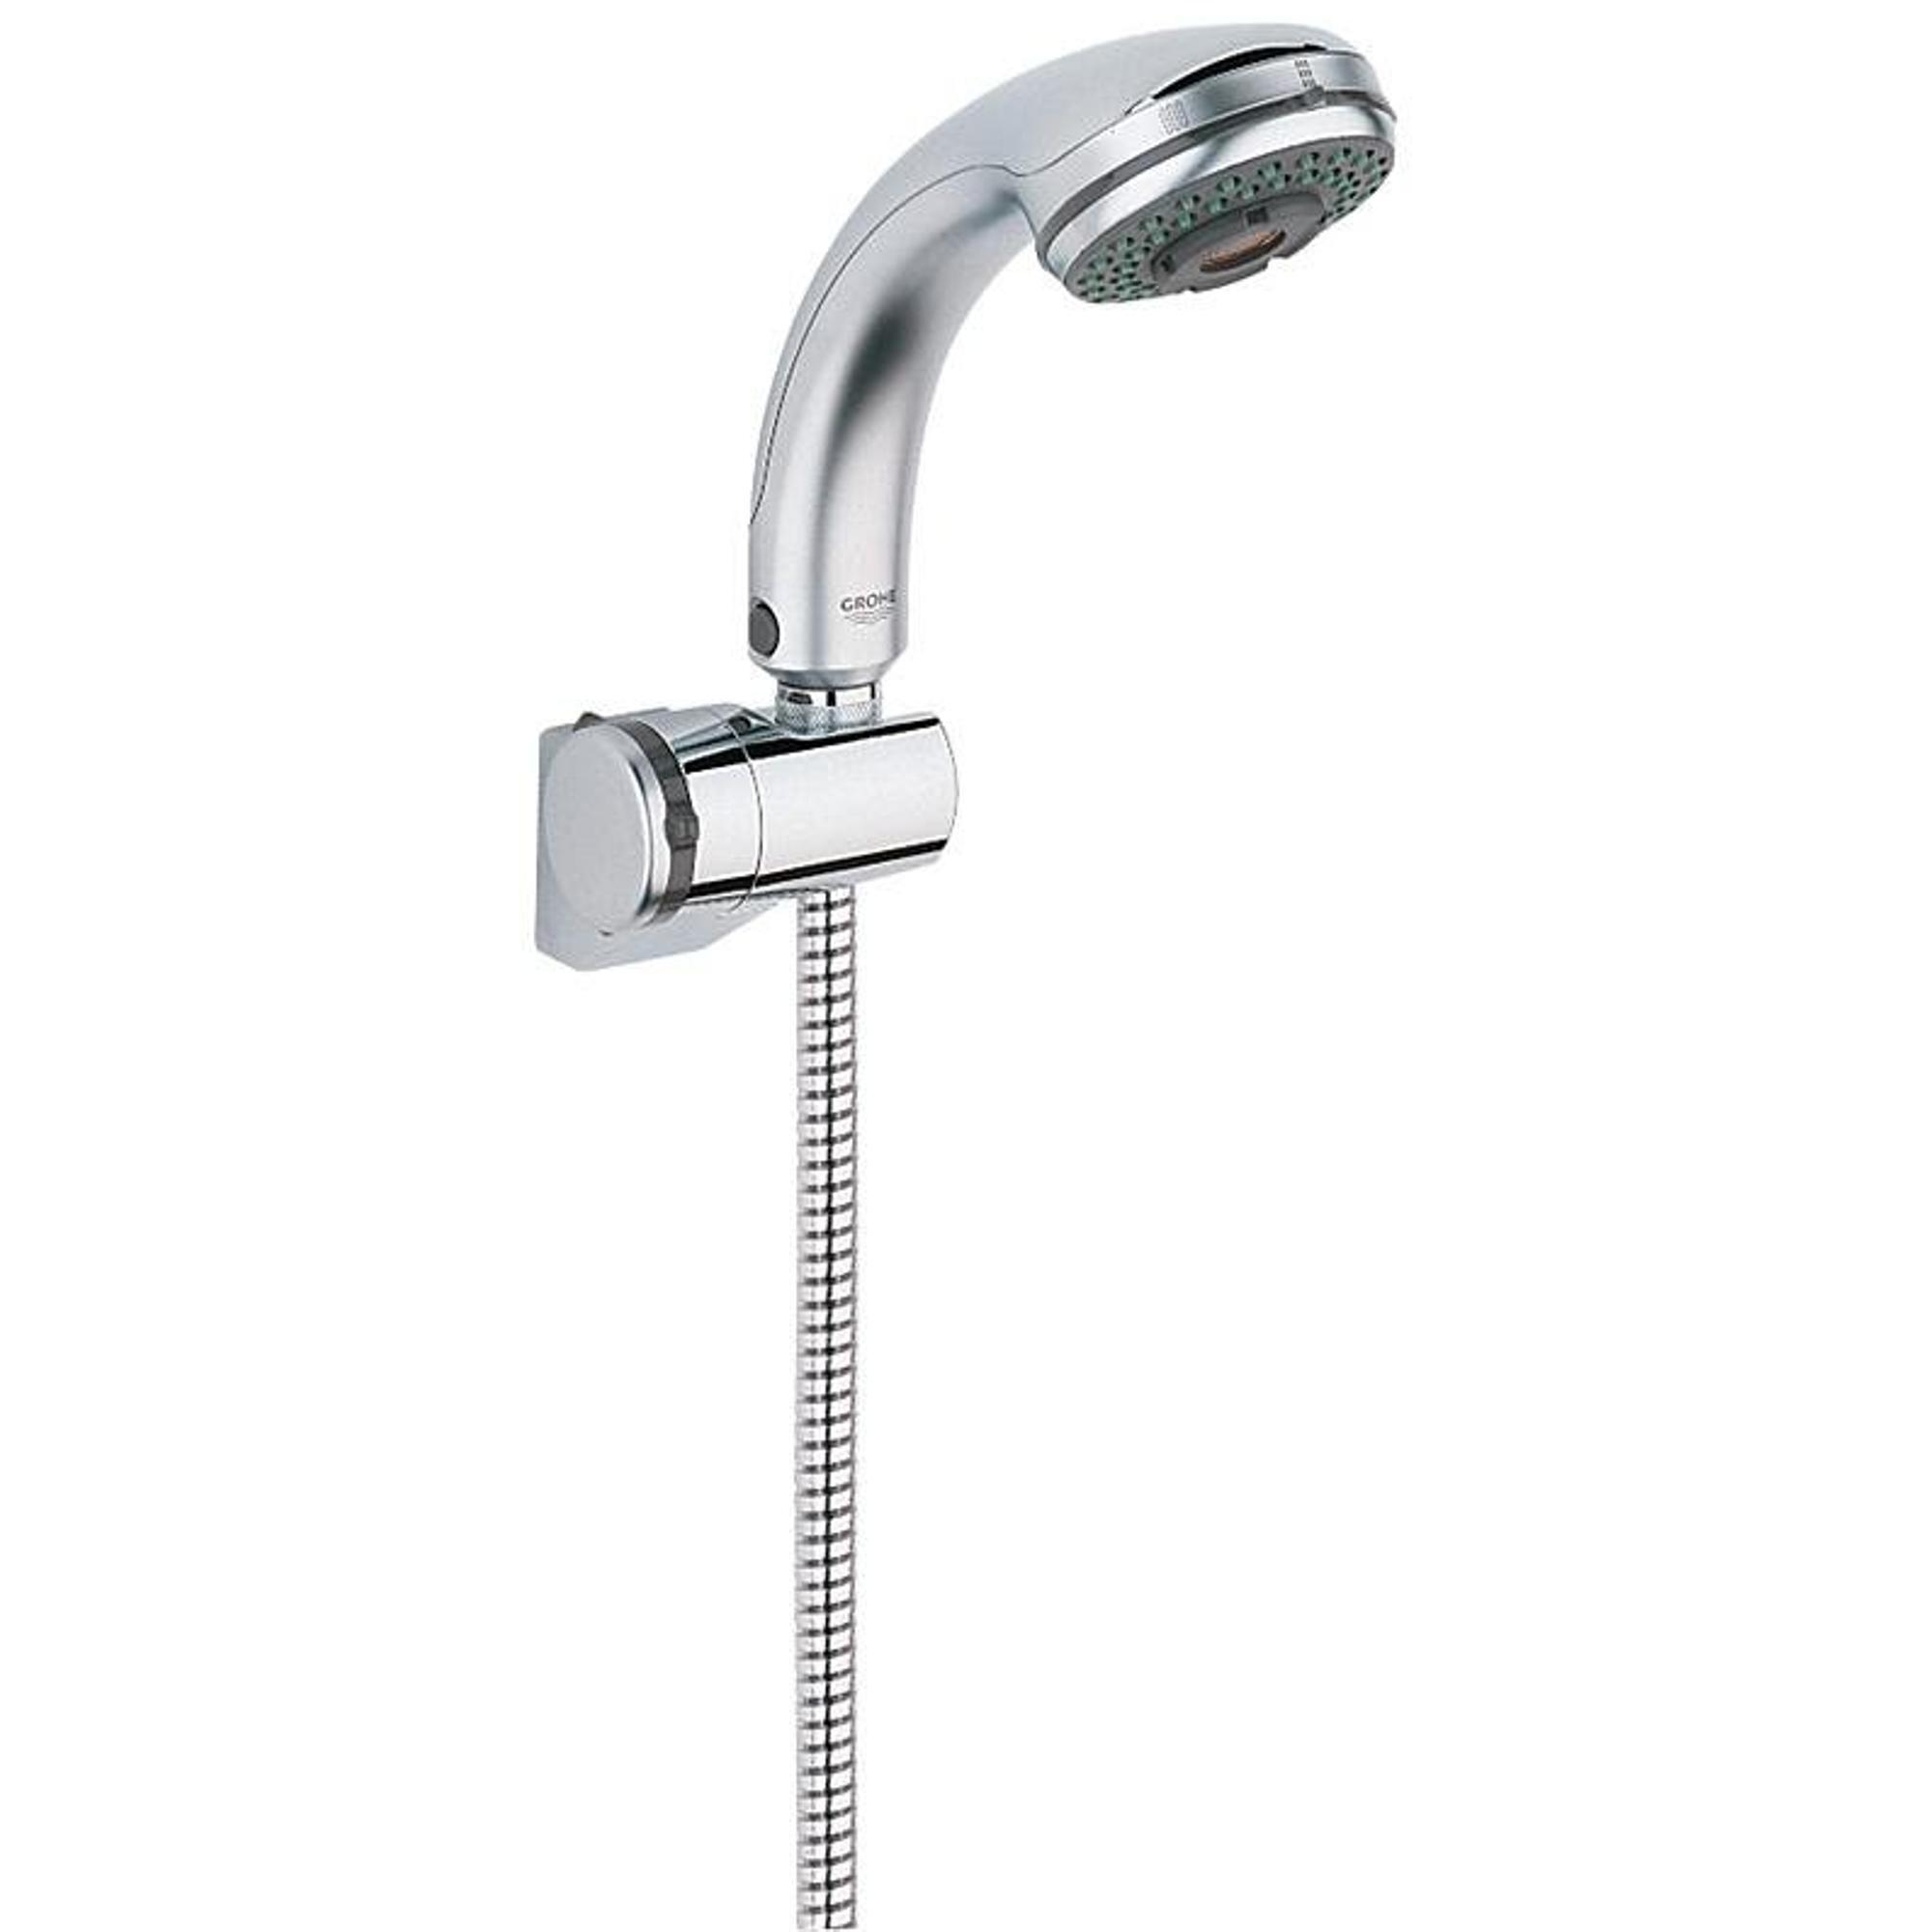 GROHE Relexa Support mural pour douchette universel amovible chrome -  28623000 